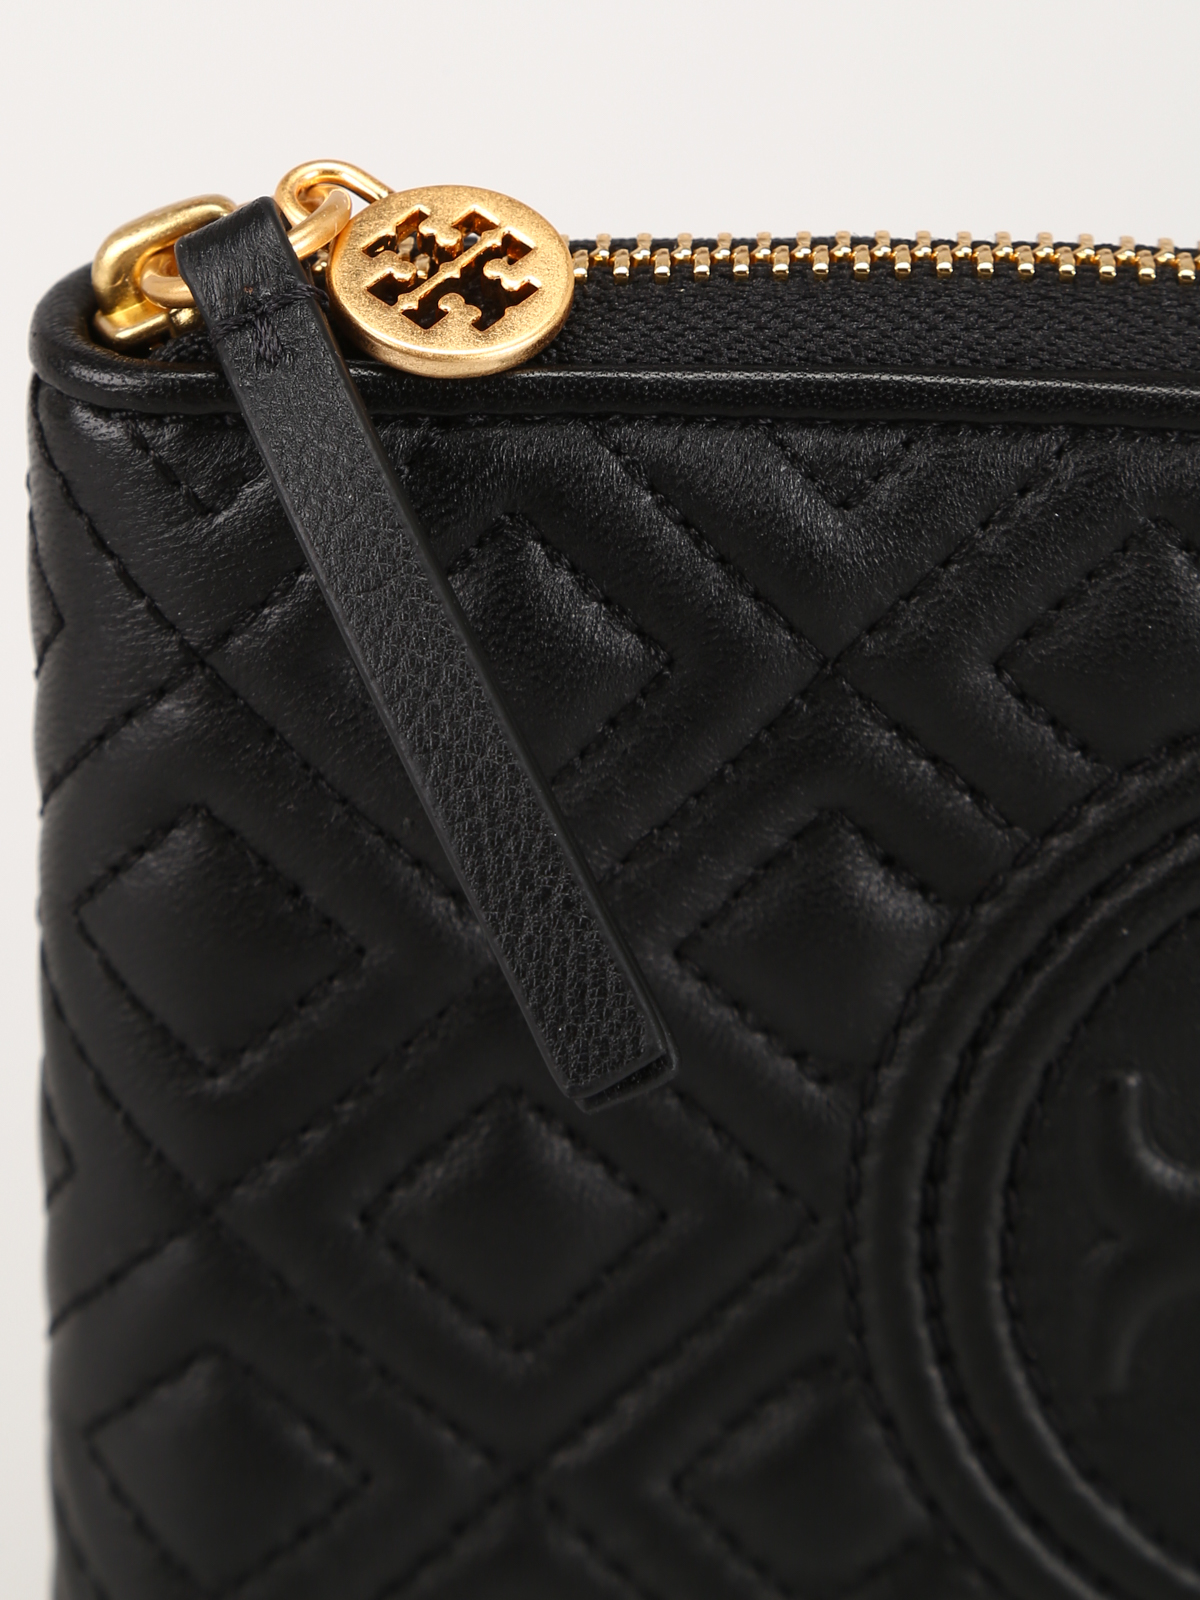 Wallets & purses Tory Burch - Fleming black quilted leather medium